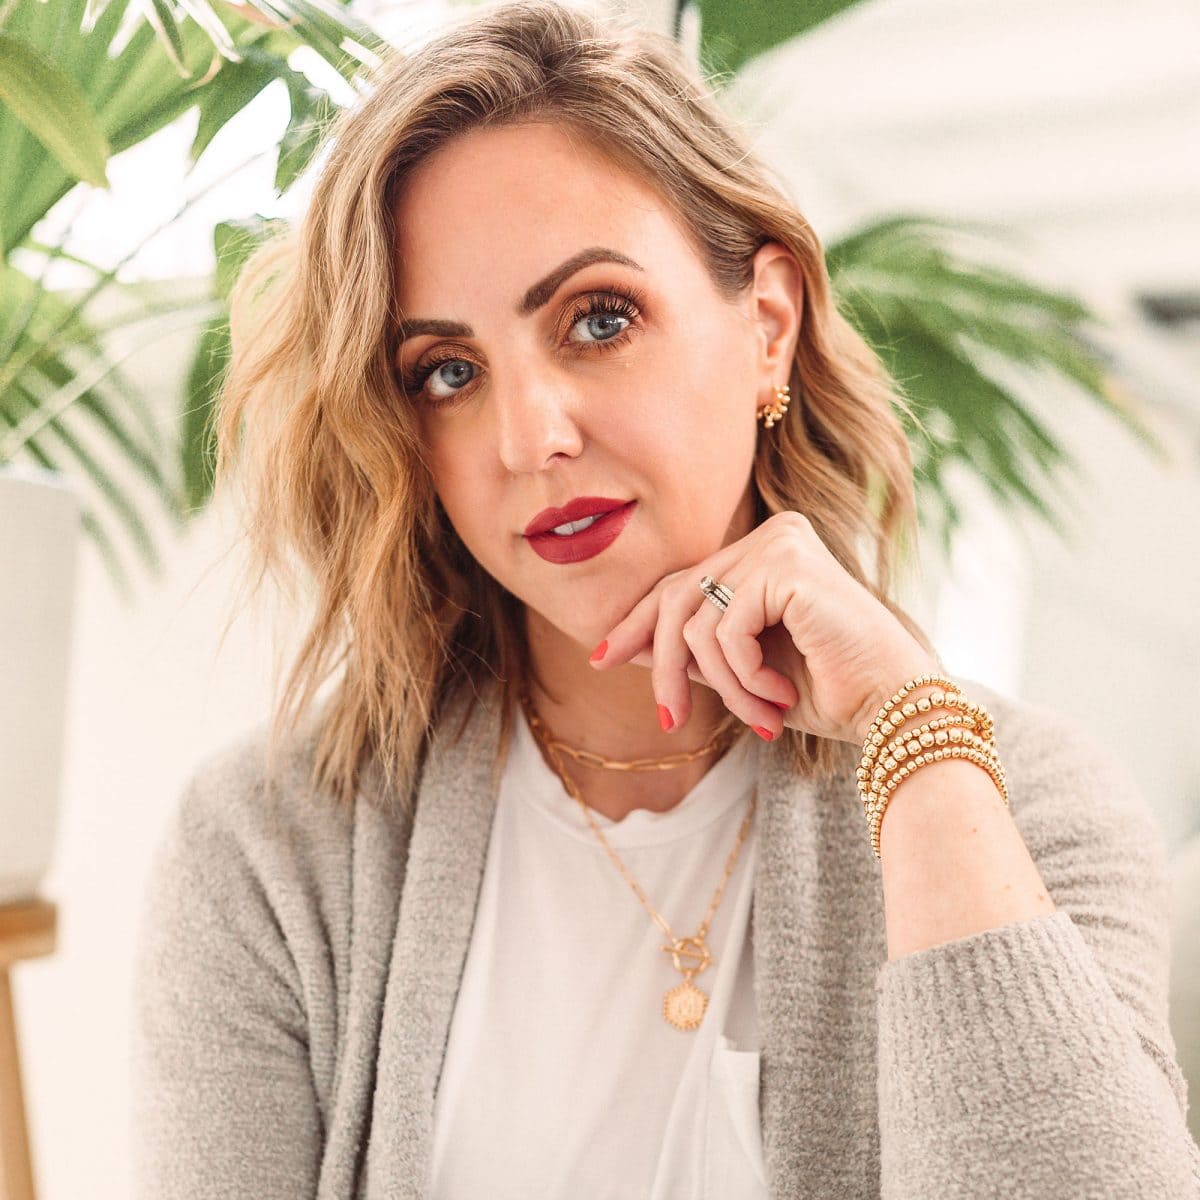 Texas influencer Meg O. shares the best jewelry on Amazon - minimalist, dainty, and more.